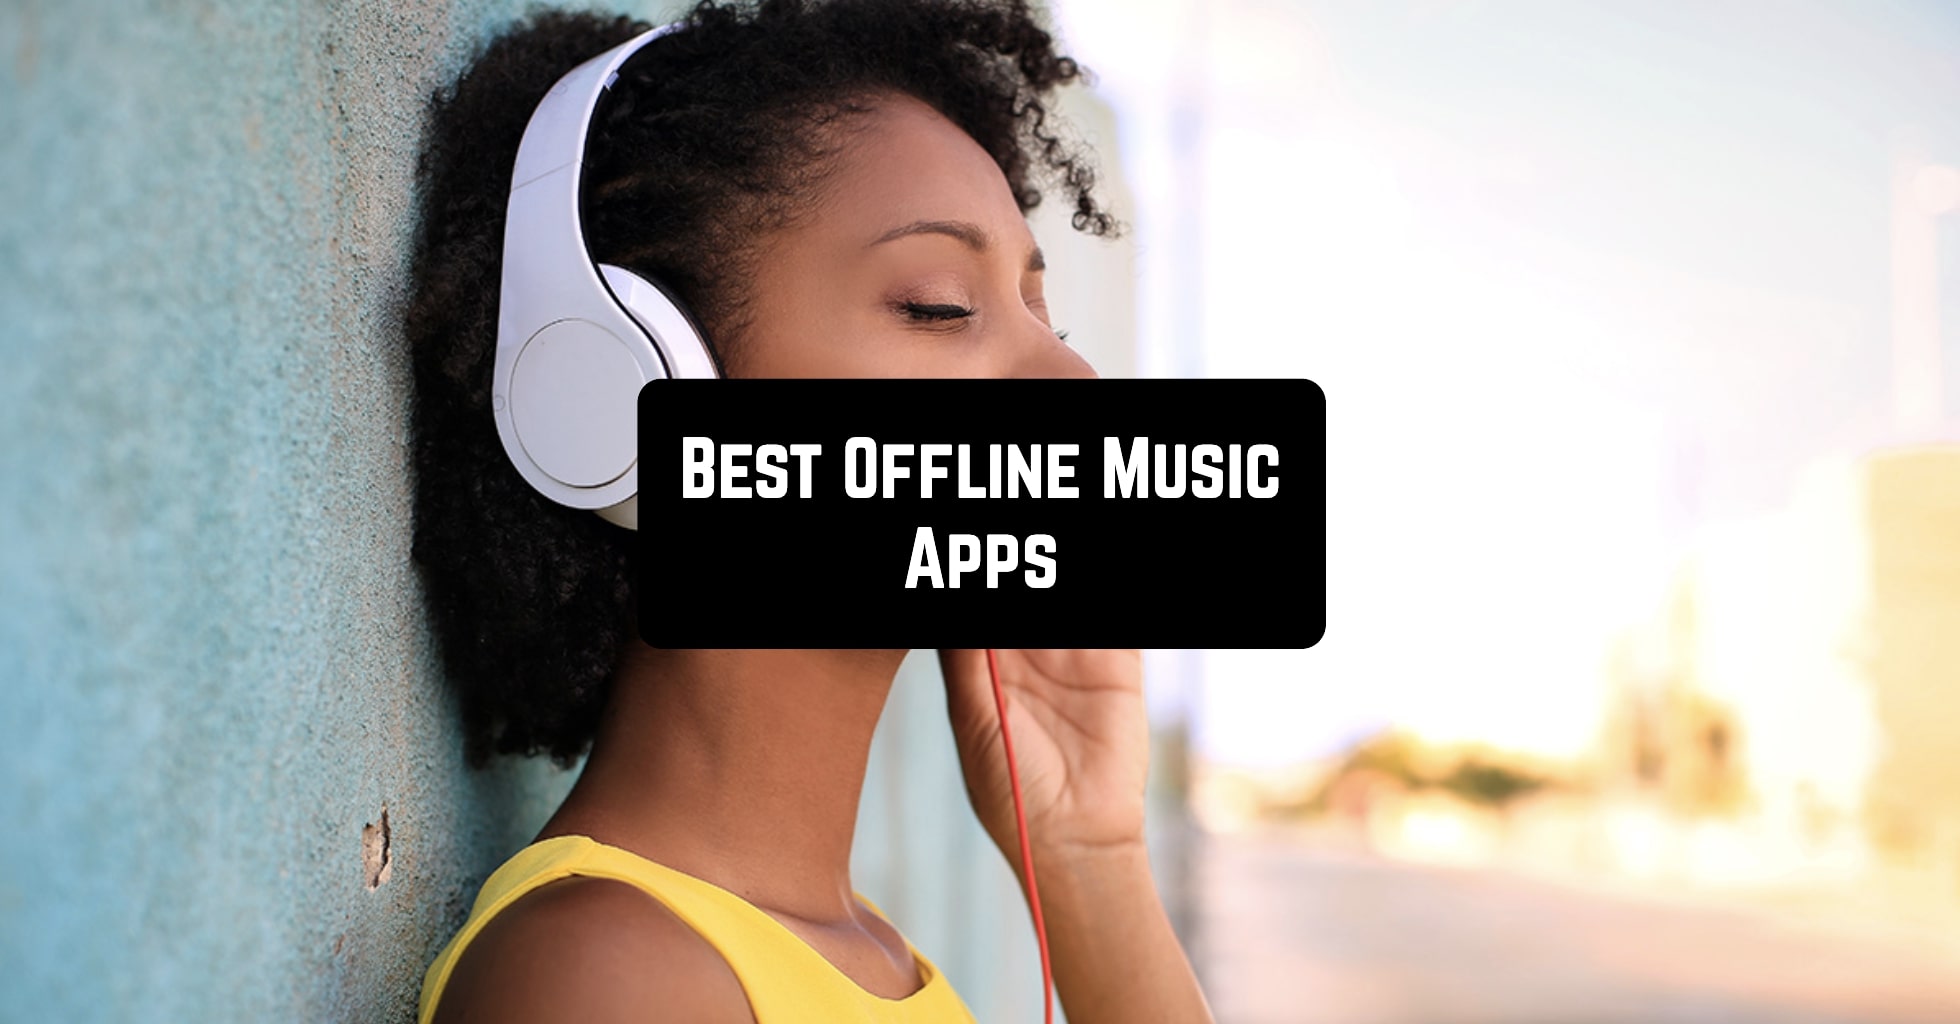 21 Best Offline Music Apps for Android & iOS